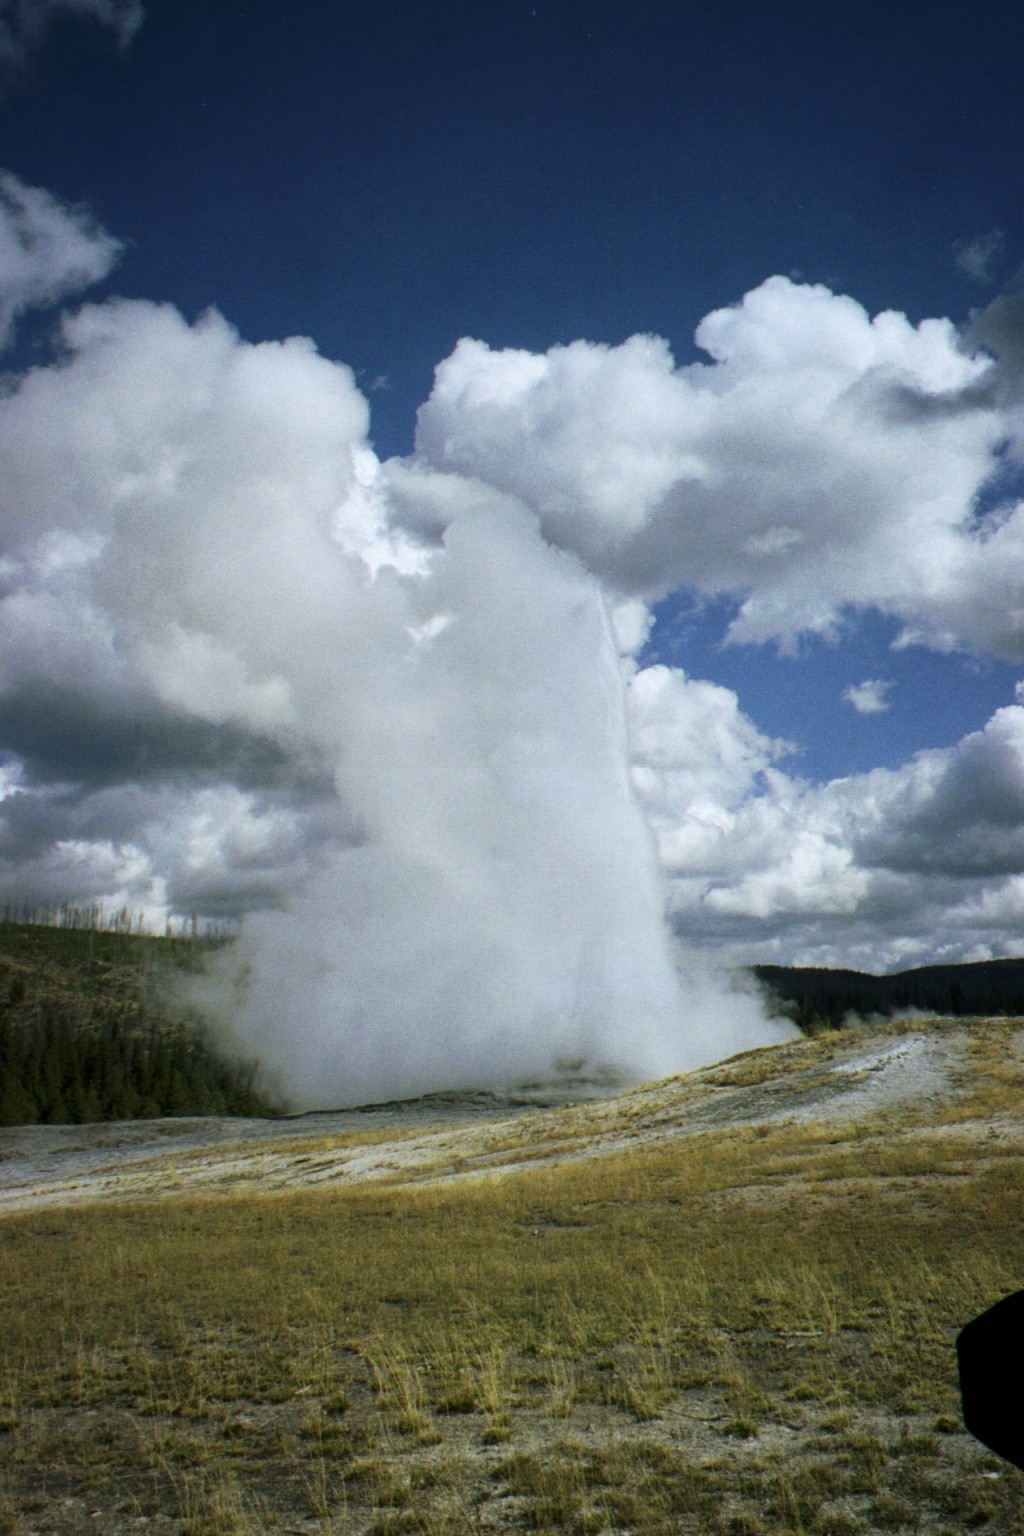 there is a large, steaming geyser on a field